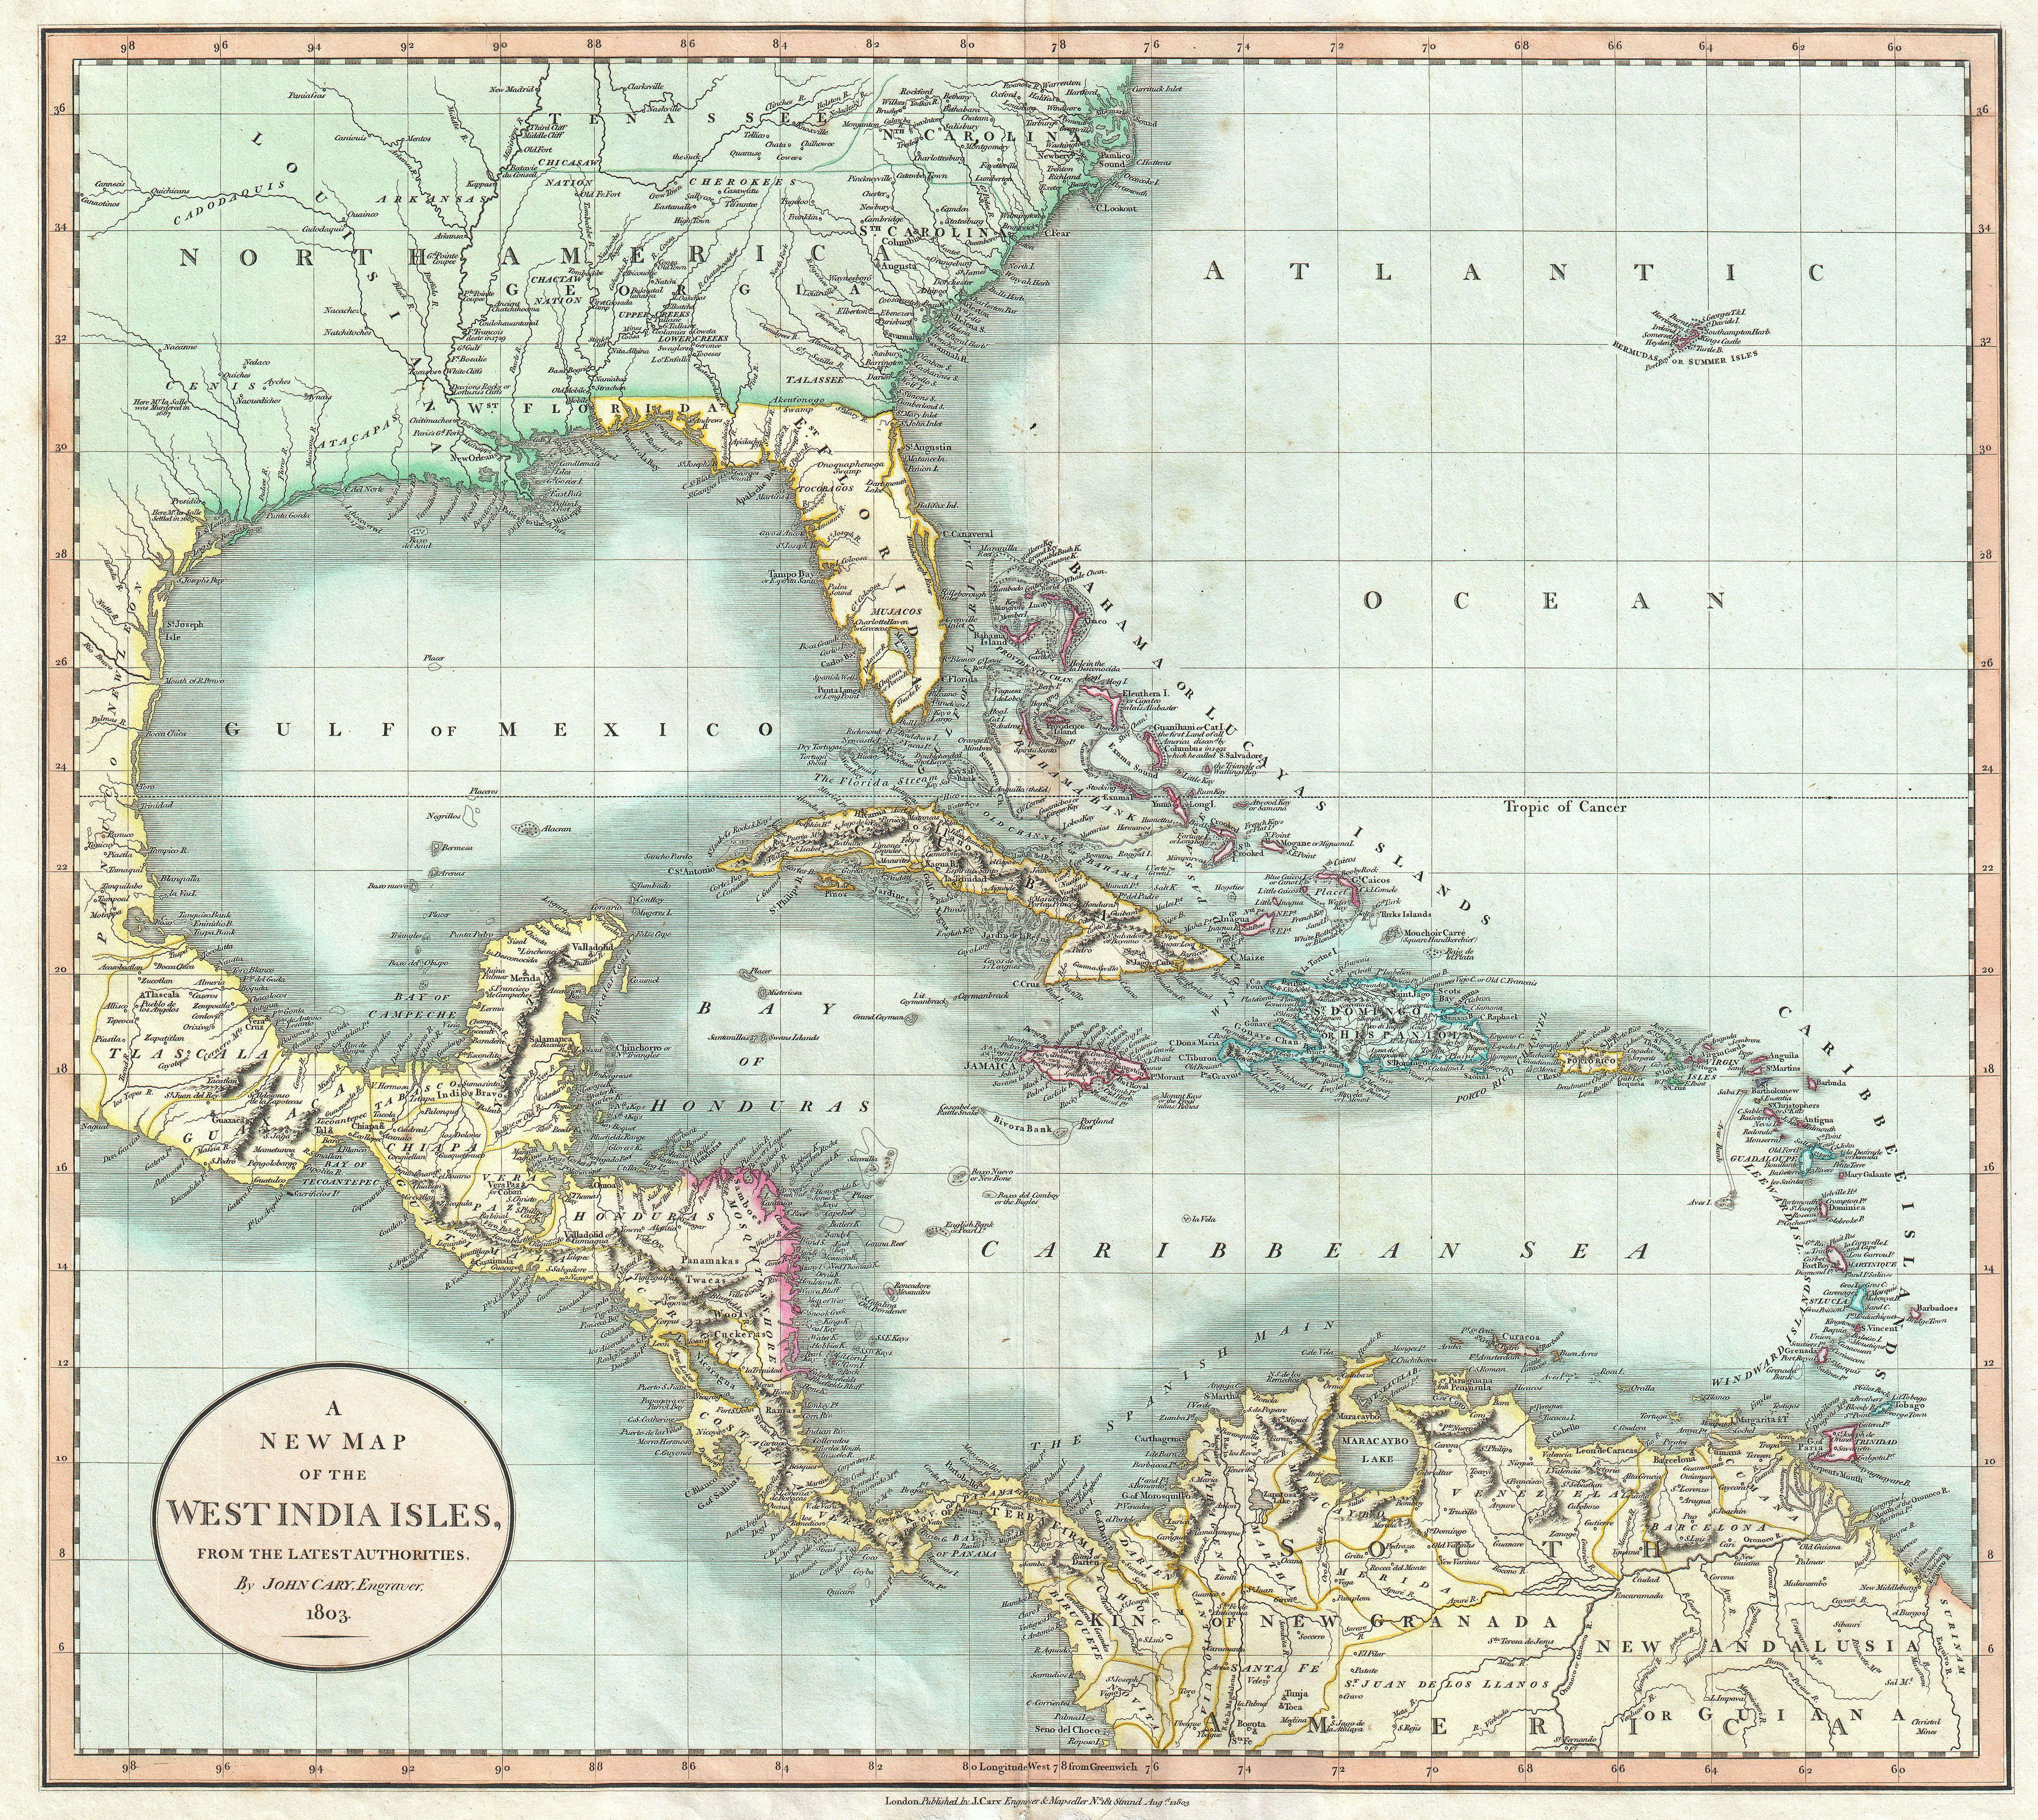 1803 Cary Map of Florida, Central America, the Bahamas, and the West Indies - Geographicus - WestIndies-cary-1803